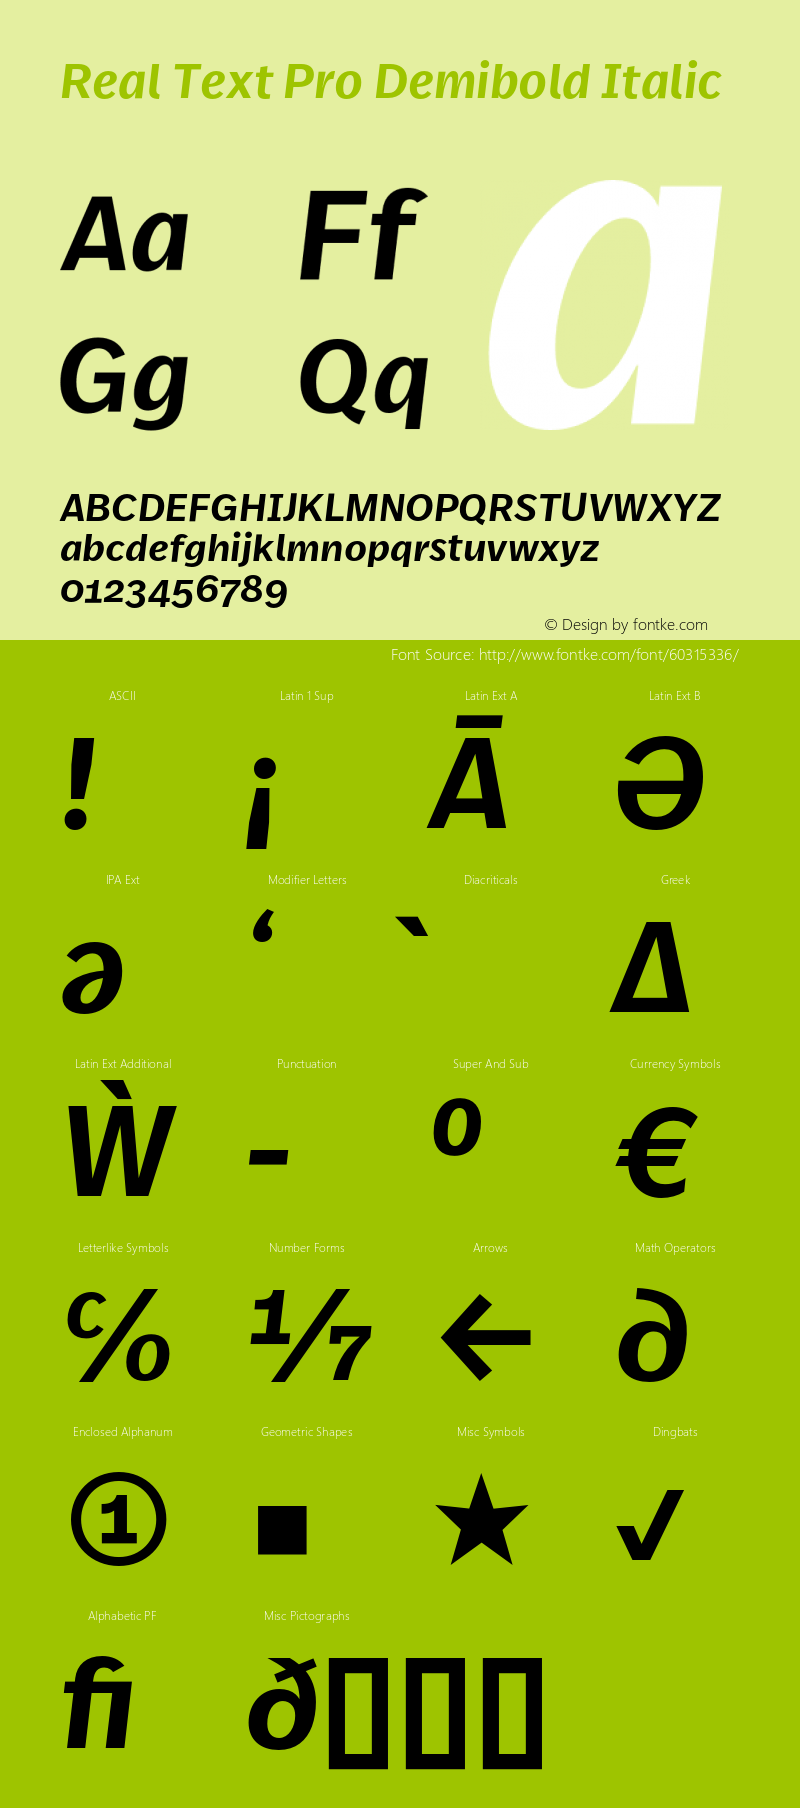 Real Text Pro Demibold Italic Version 7.601, build 13, g2.5.2.1165, s3 Font Sample